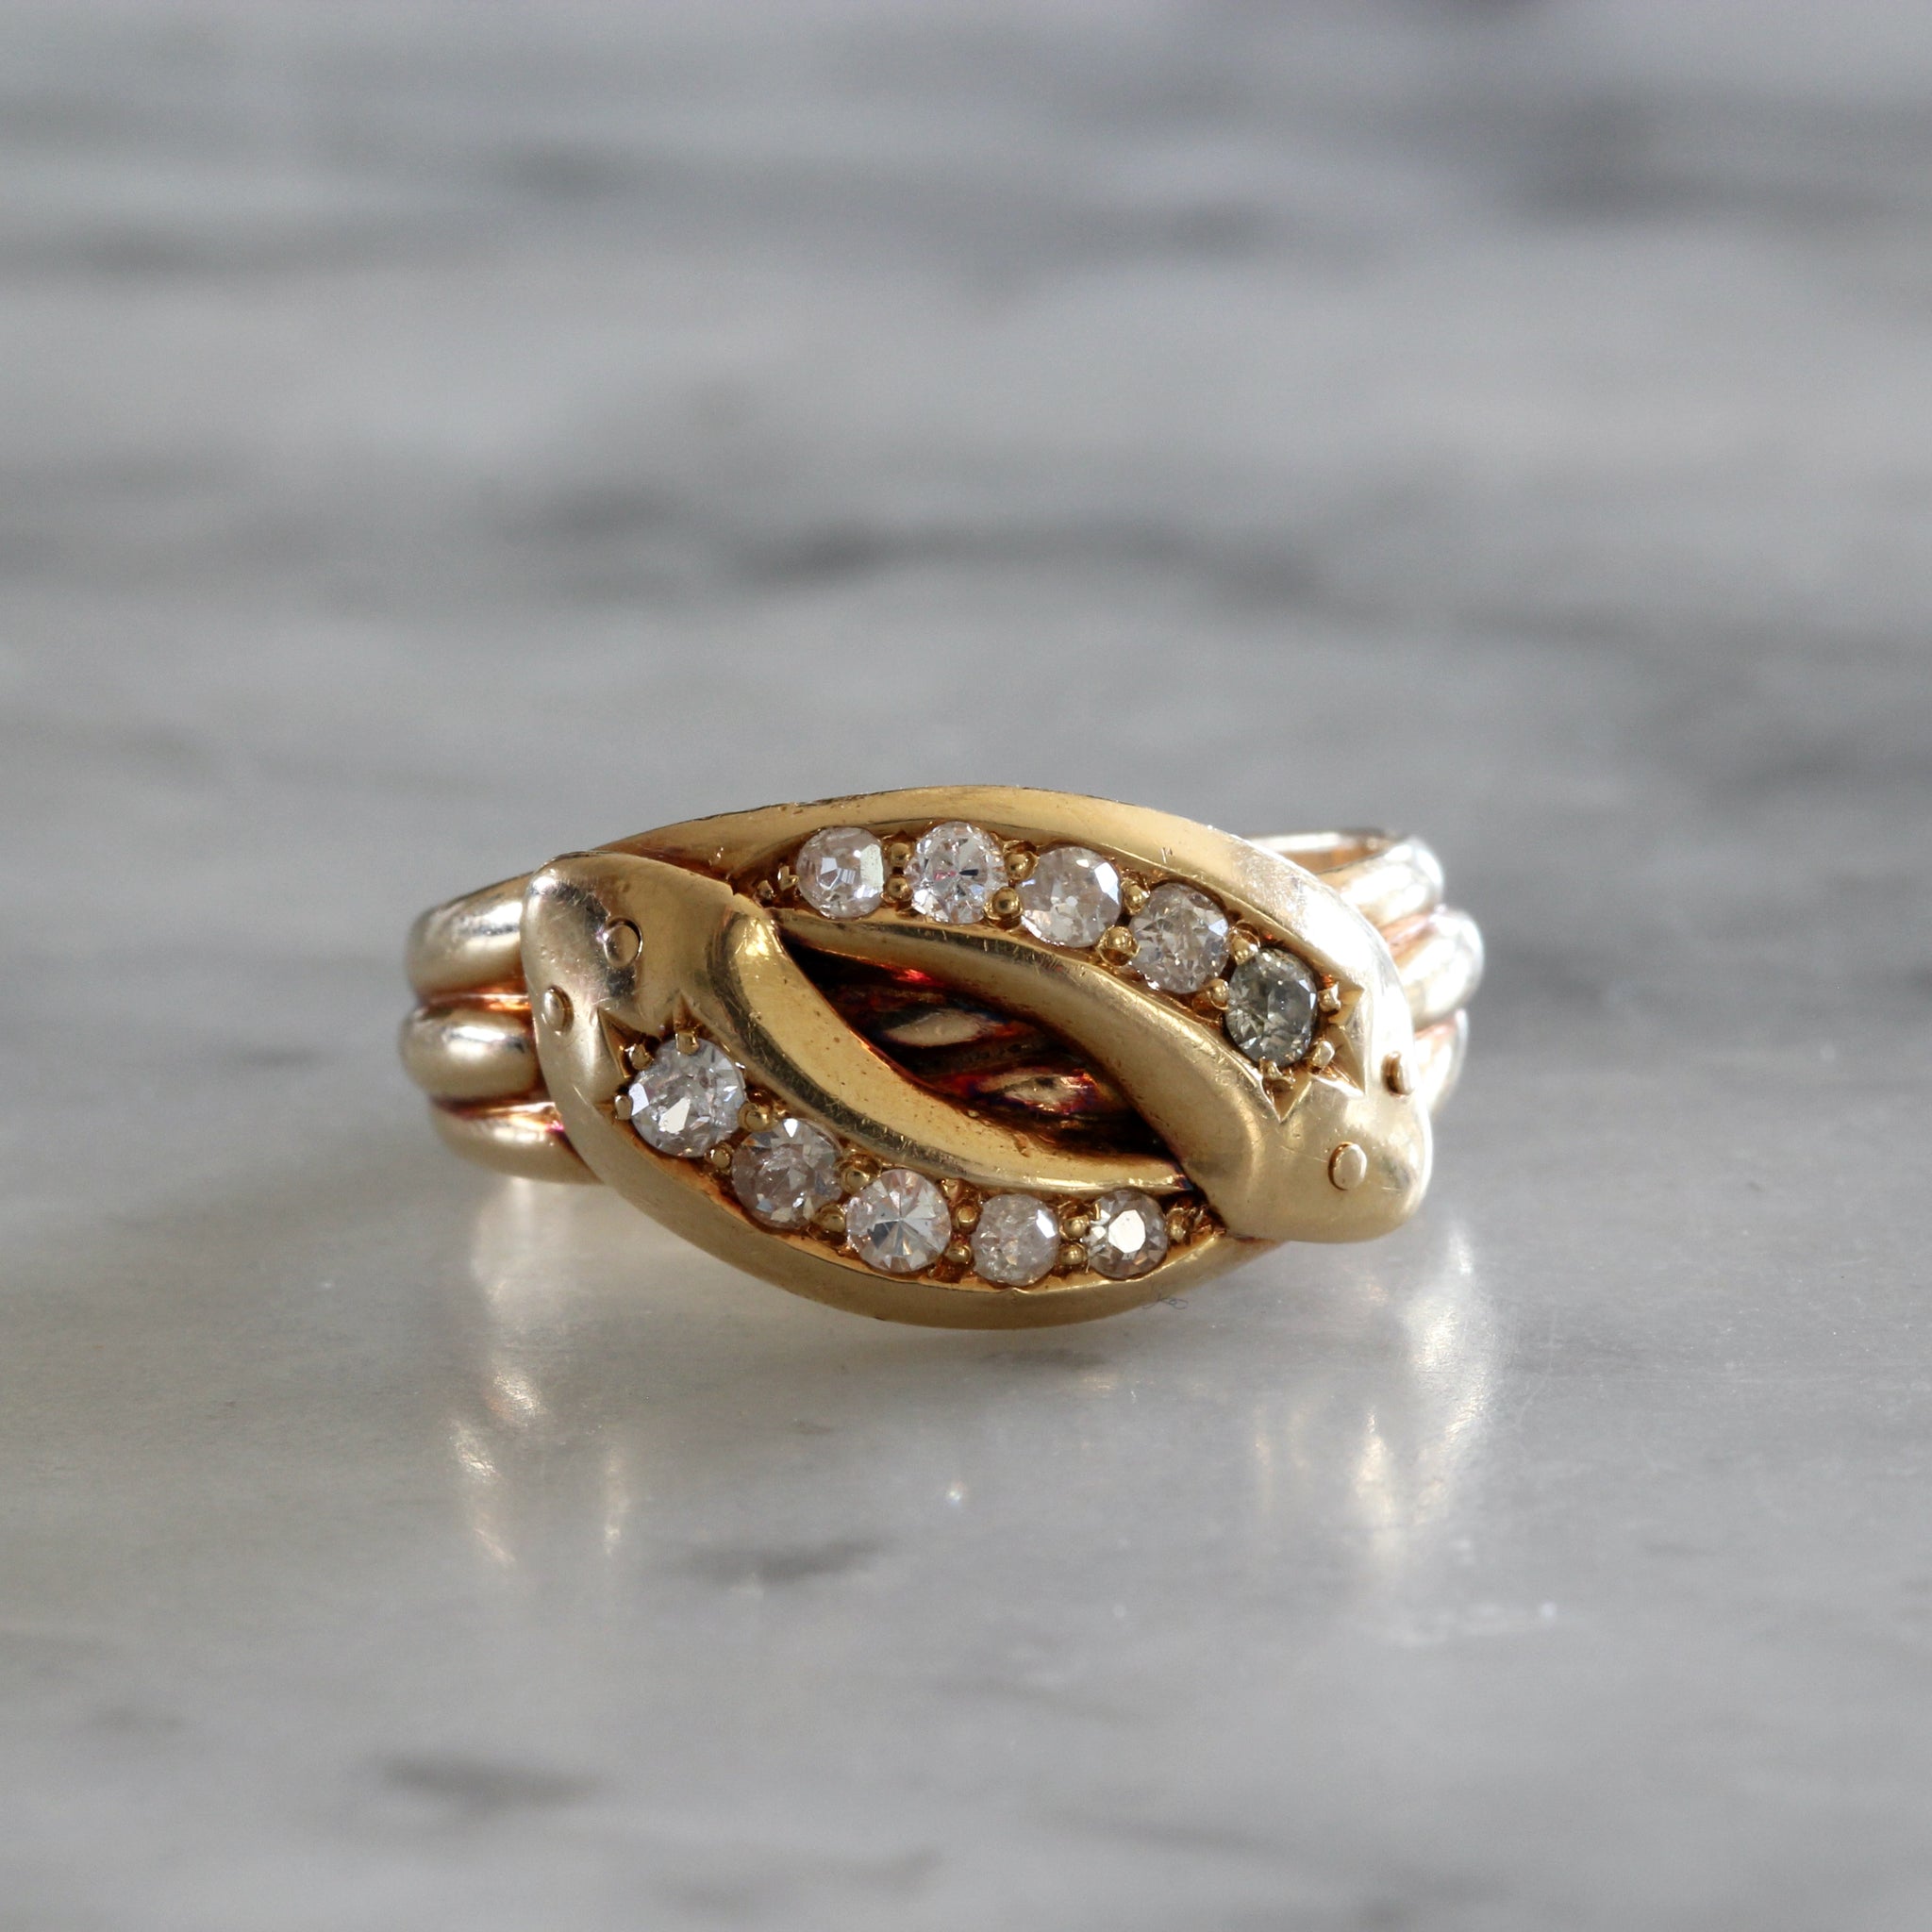 Victorian Double Headed Snake Ring